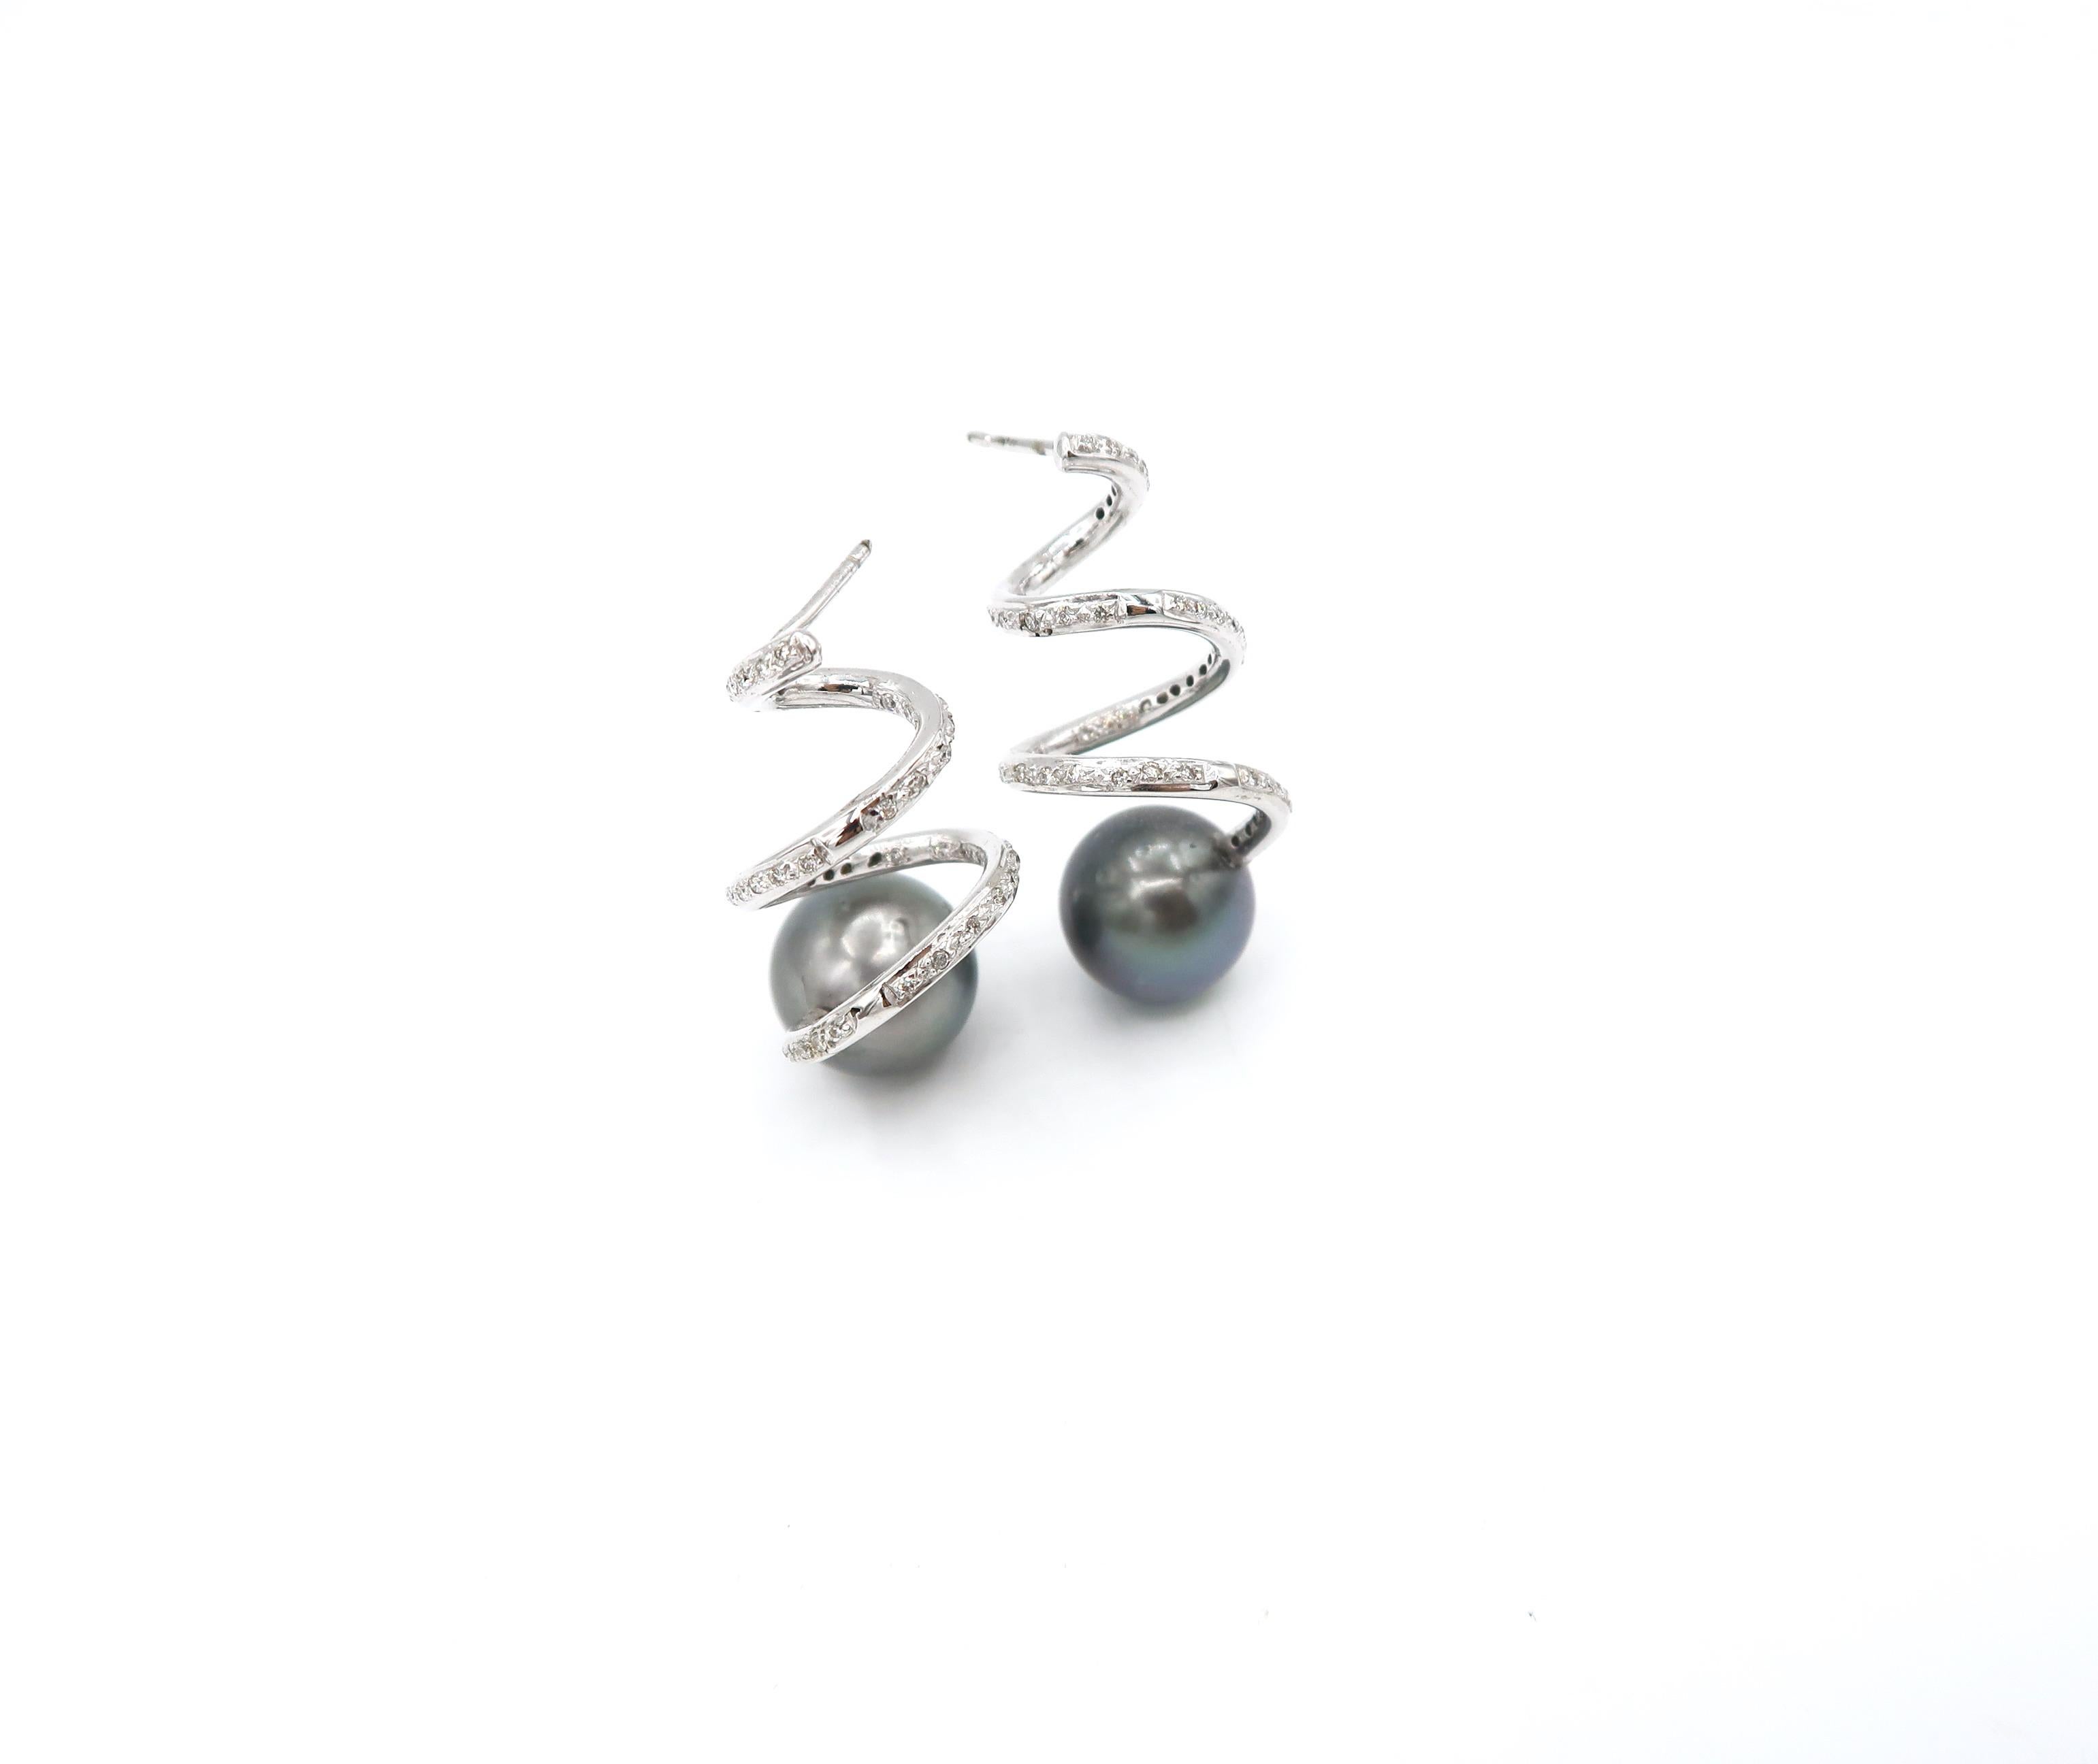 Helix Twirl Diamond Pavé Earrings in 18K White Gold with Tahitian Pearl Tips

Pearl: 13mm 
Diamond: 0.78ct.
Gold: 18K Gold 14.42g.